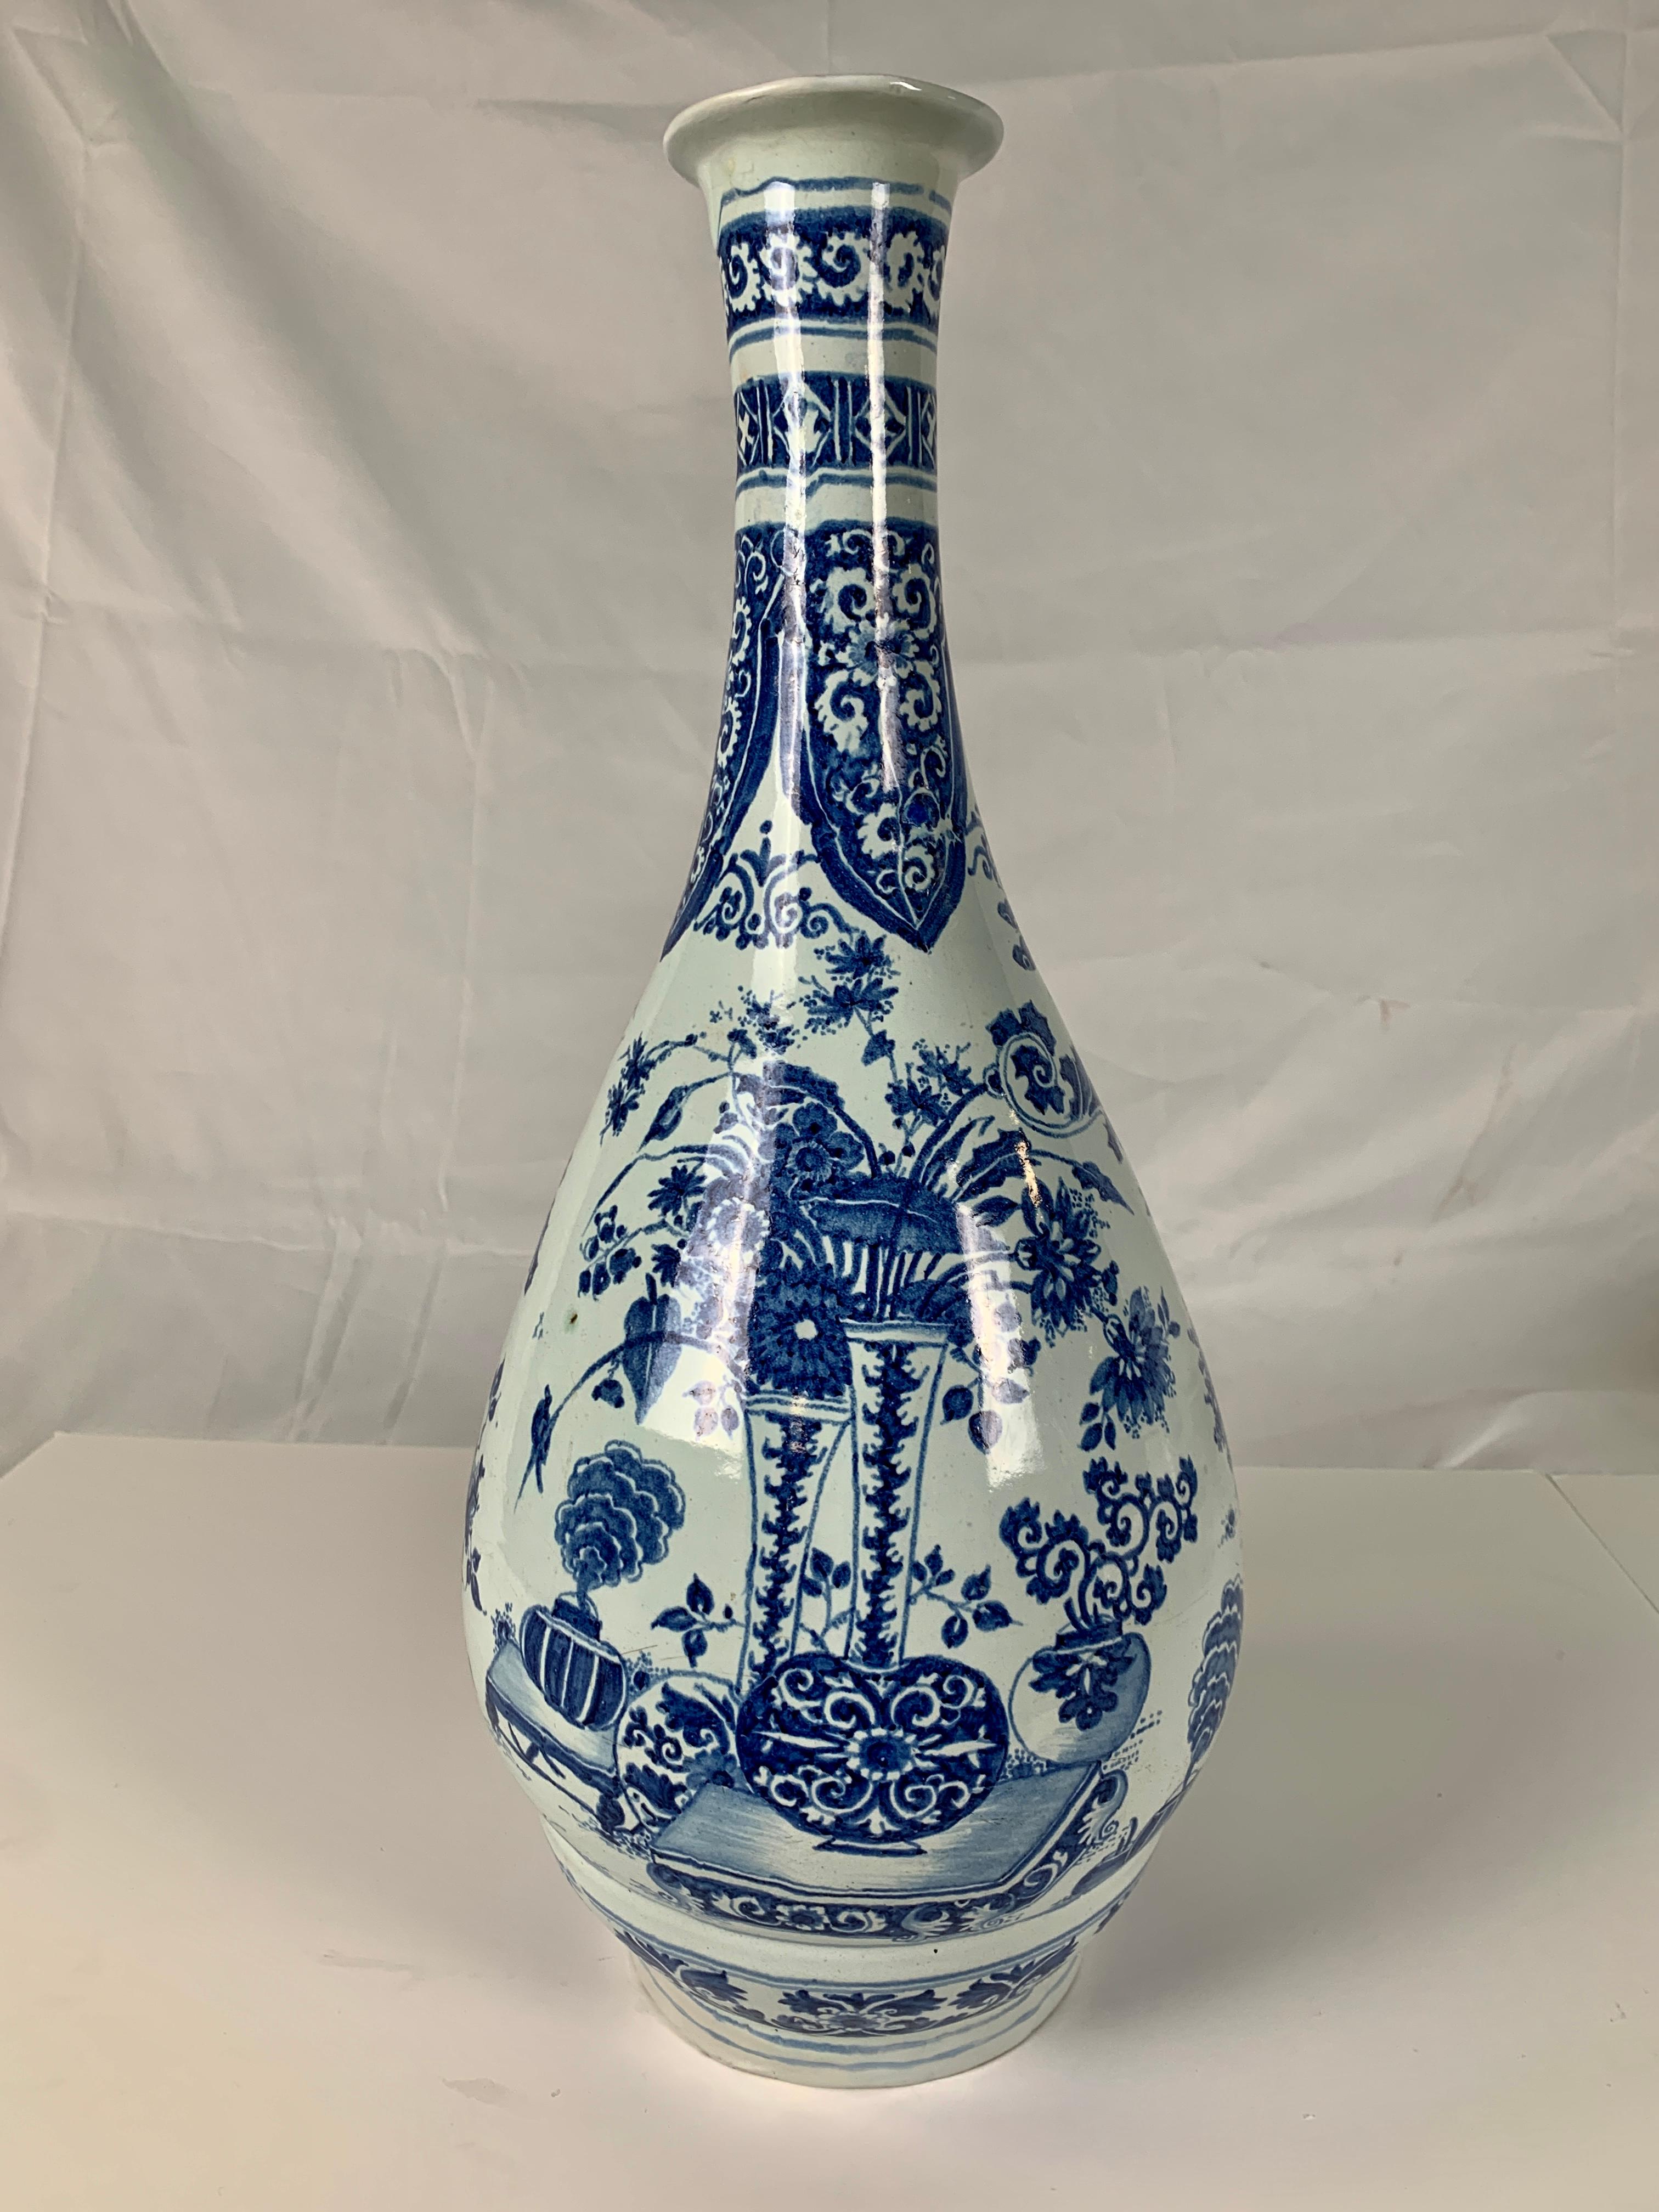 This extraordinary Delft vase dates to the late 17th century. It is modeled after Chinese pear-shaped bottles, conventionally known as “yuhuchun bottles,” made since the Ming dynasty (1368-1644). The vase's designs are partially inspired by